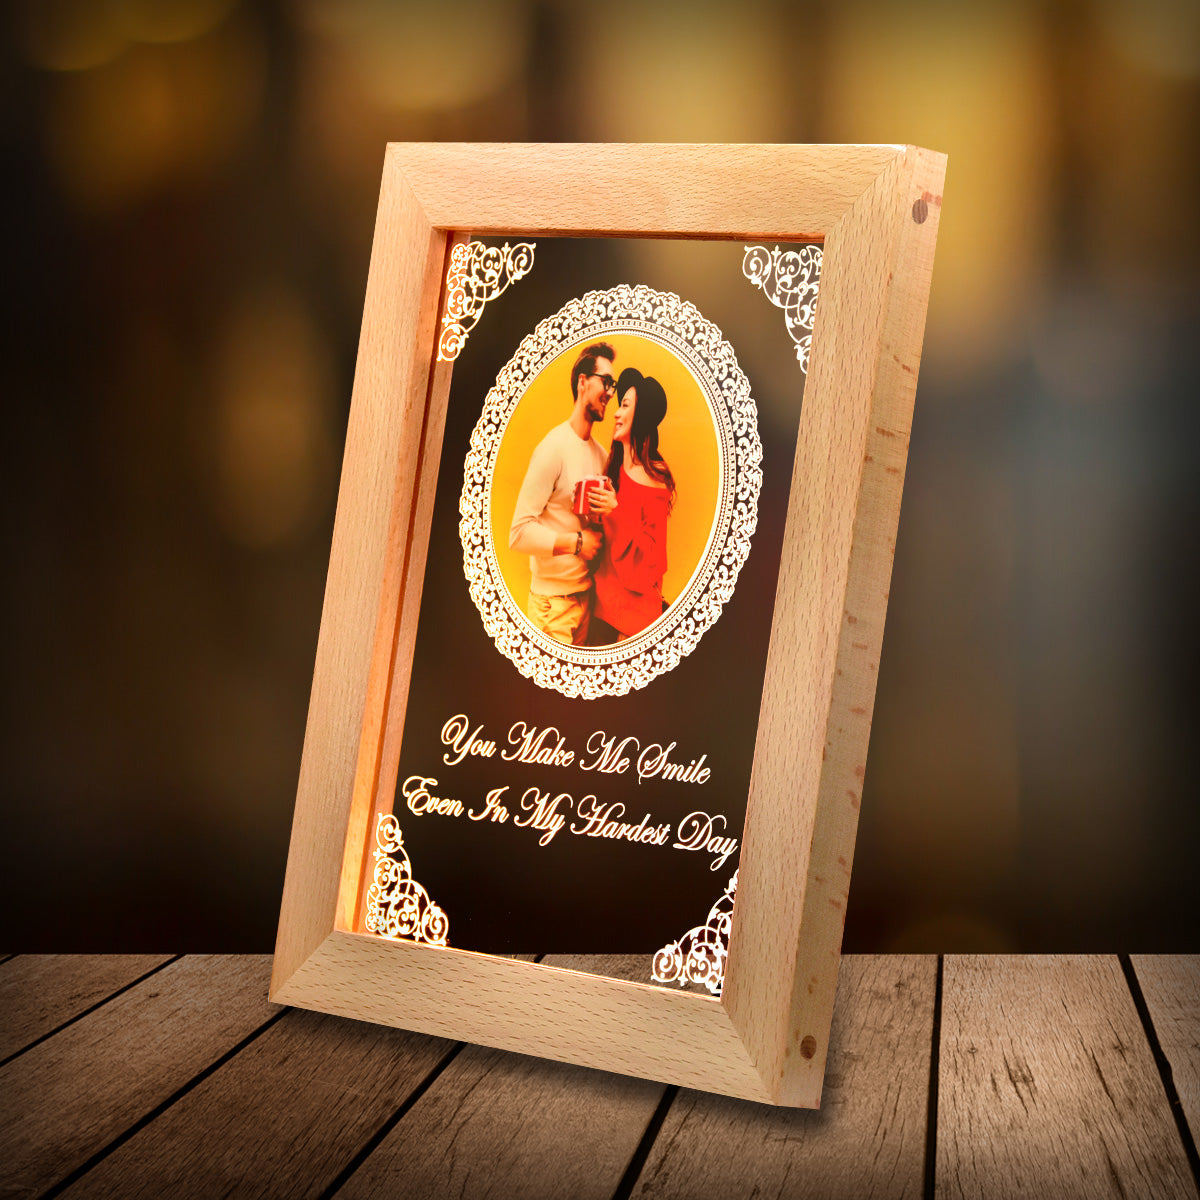 Personalized wooden led frame for couple